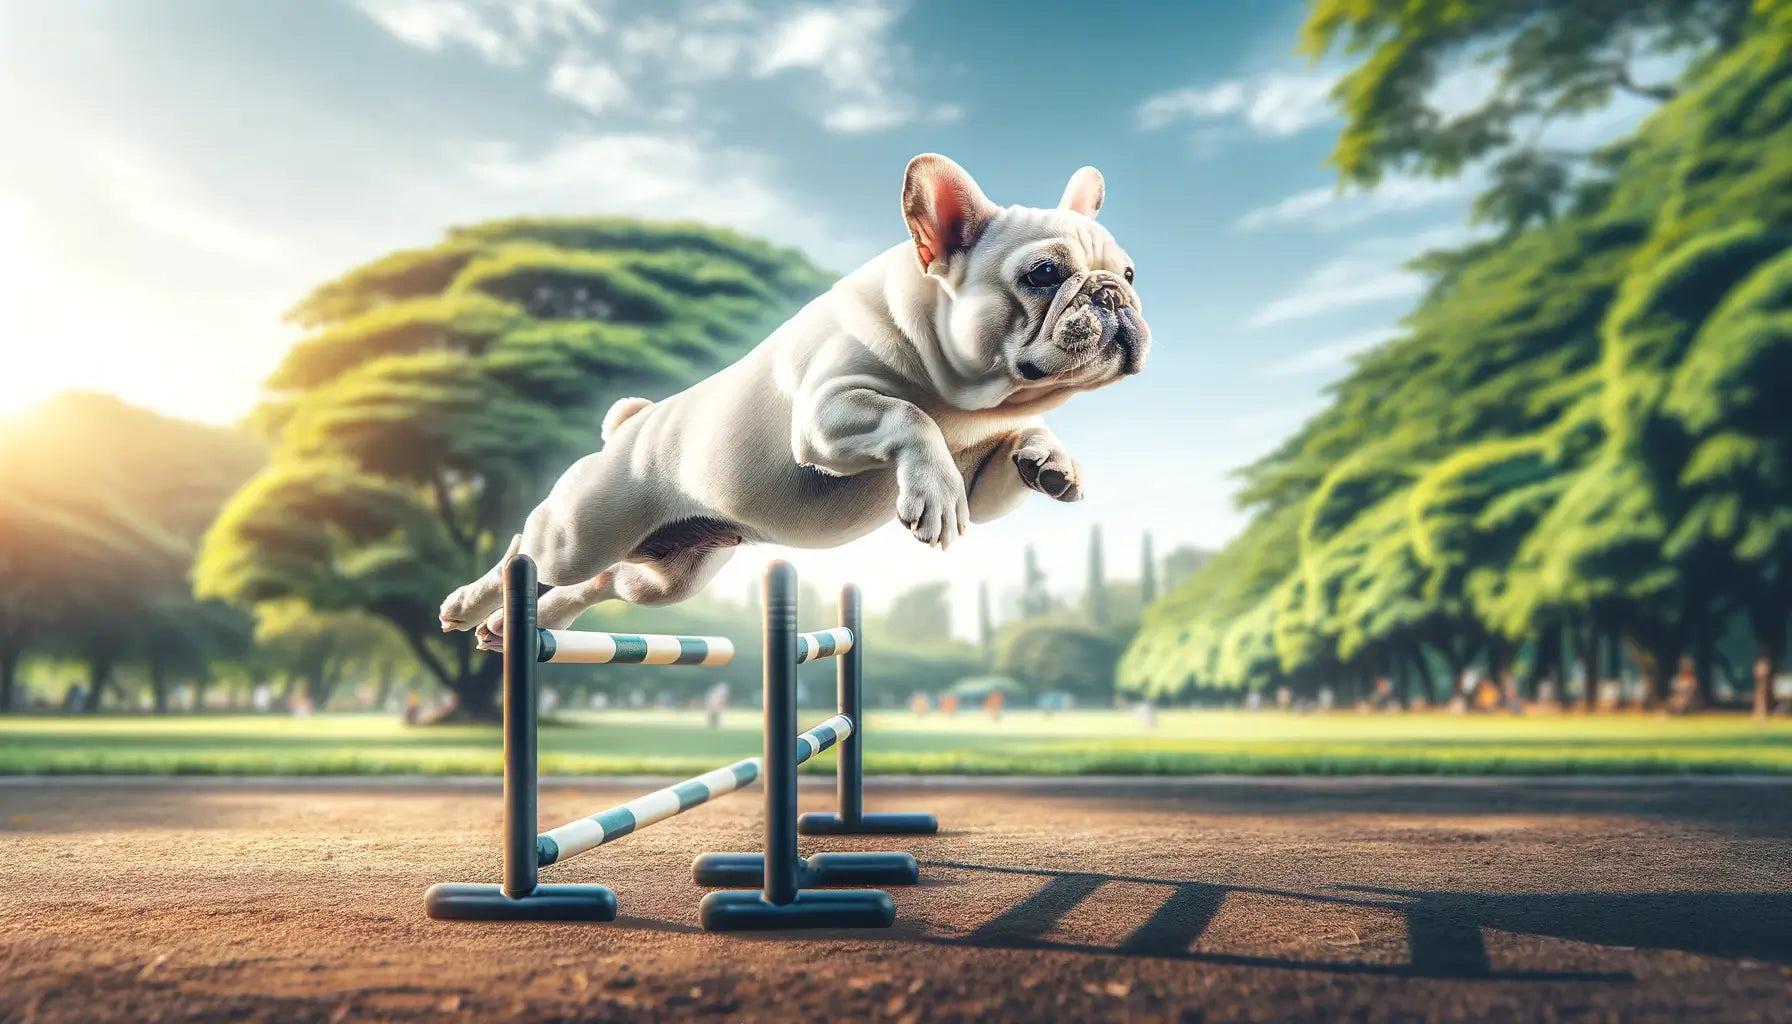 White French Bulldog leaping over a hurdle in a park.